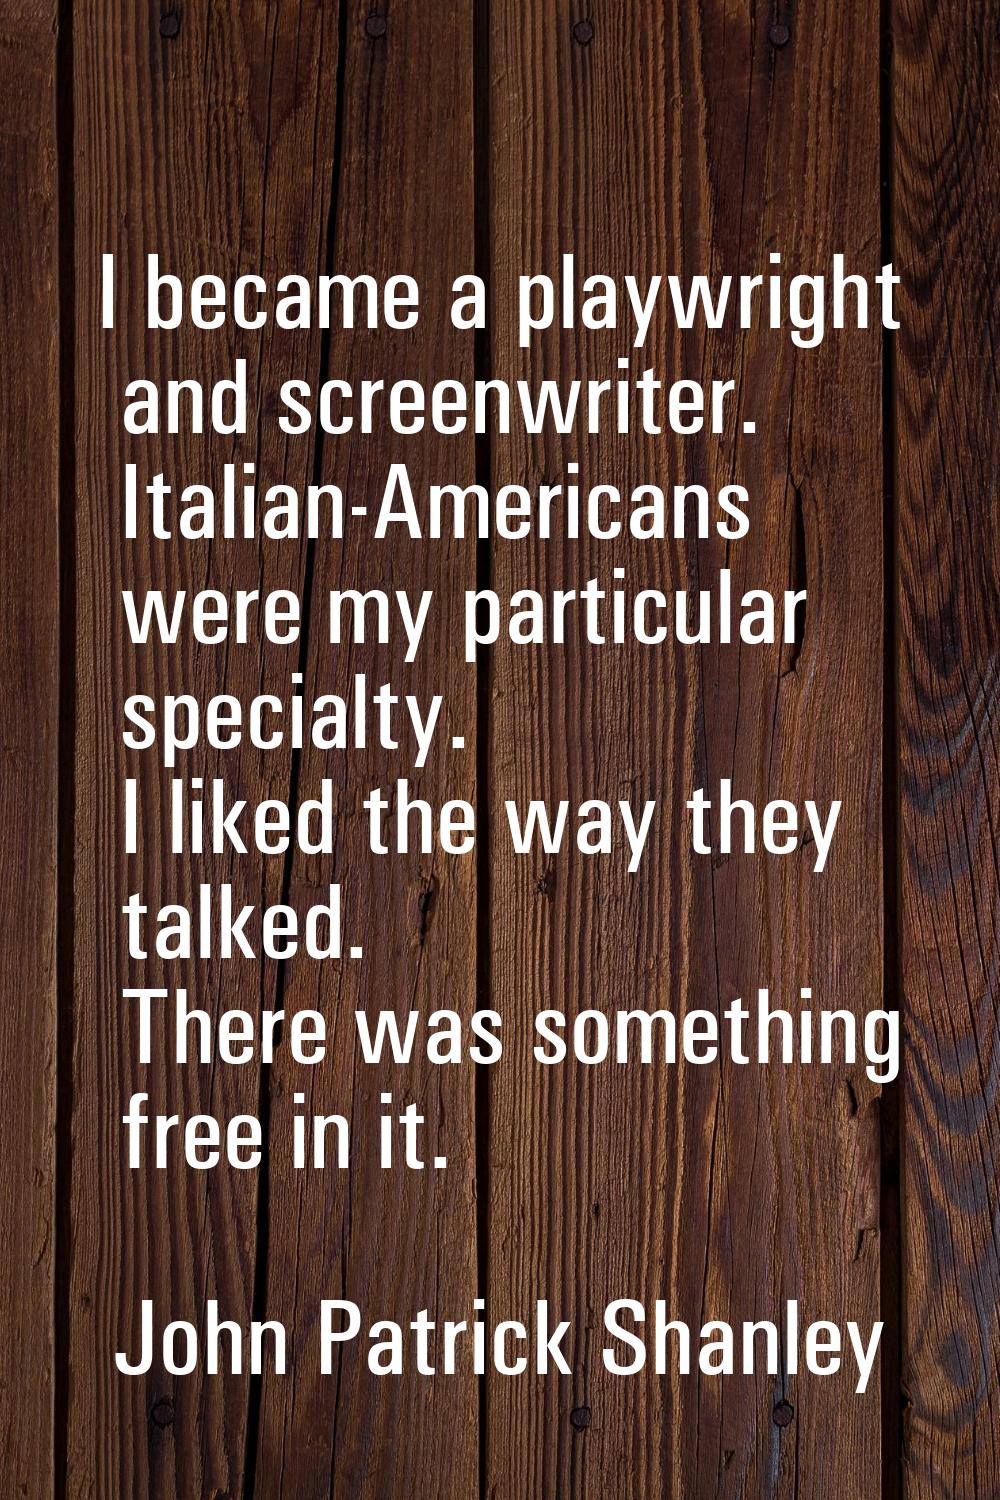 I became a playwright and screenwriter. Italian-Americans were my particular specialty. I liked the